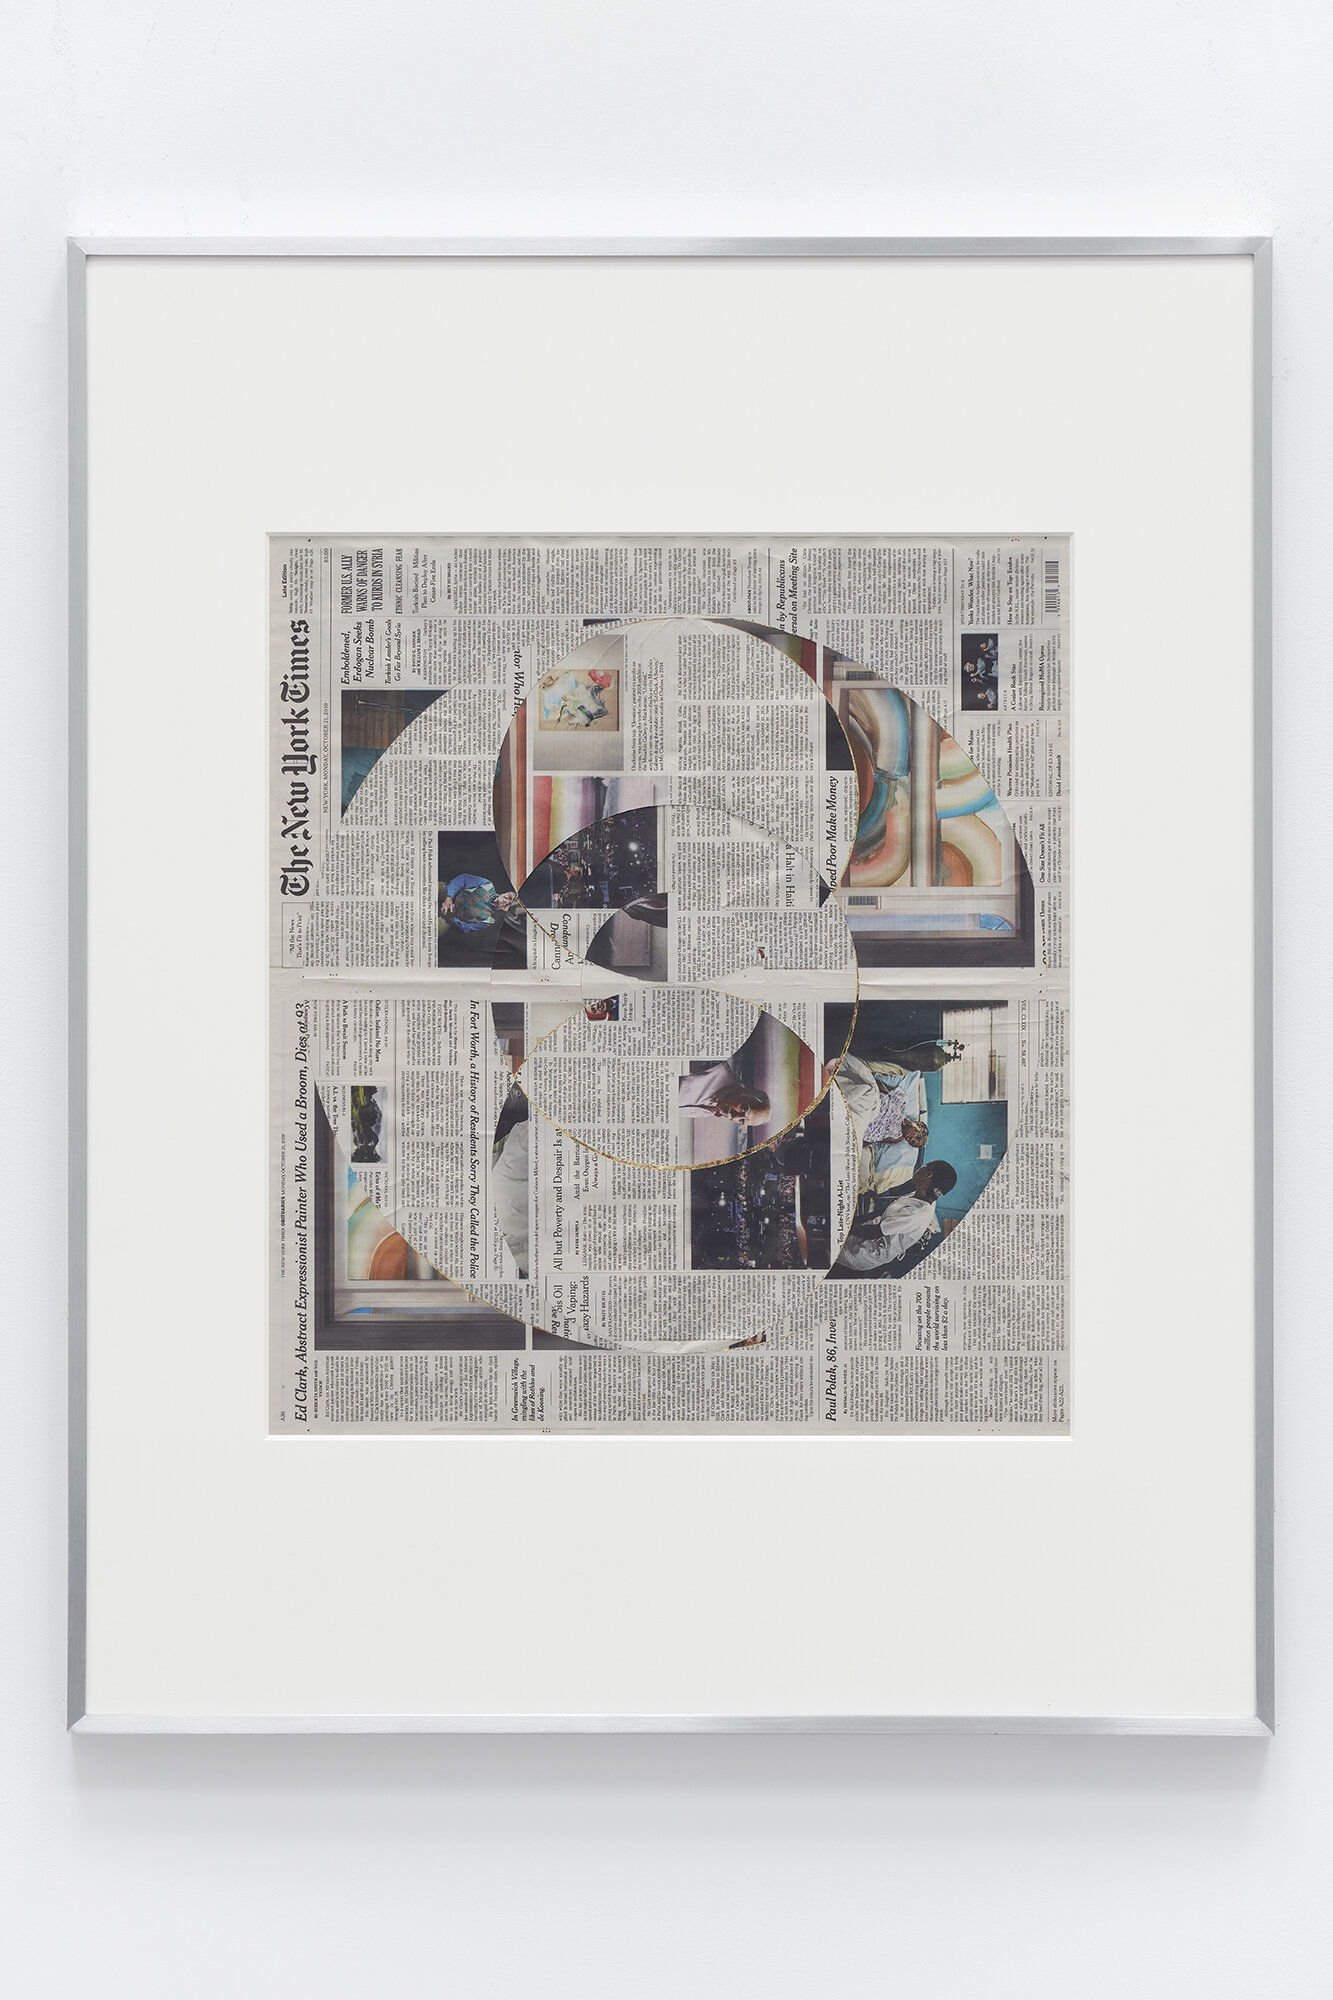   Blind Collage (Three 180º Rotations, The New York Times, Monday, October 21, 2019)    2019   Newspaper, tape, and 22 karat gold leaf  39 1/8 x 31 1/4 inches  Exhibition:  Abstract of a Partial Disassembling of an Invention without a Future … , 2019